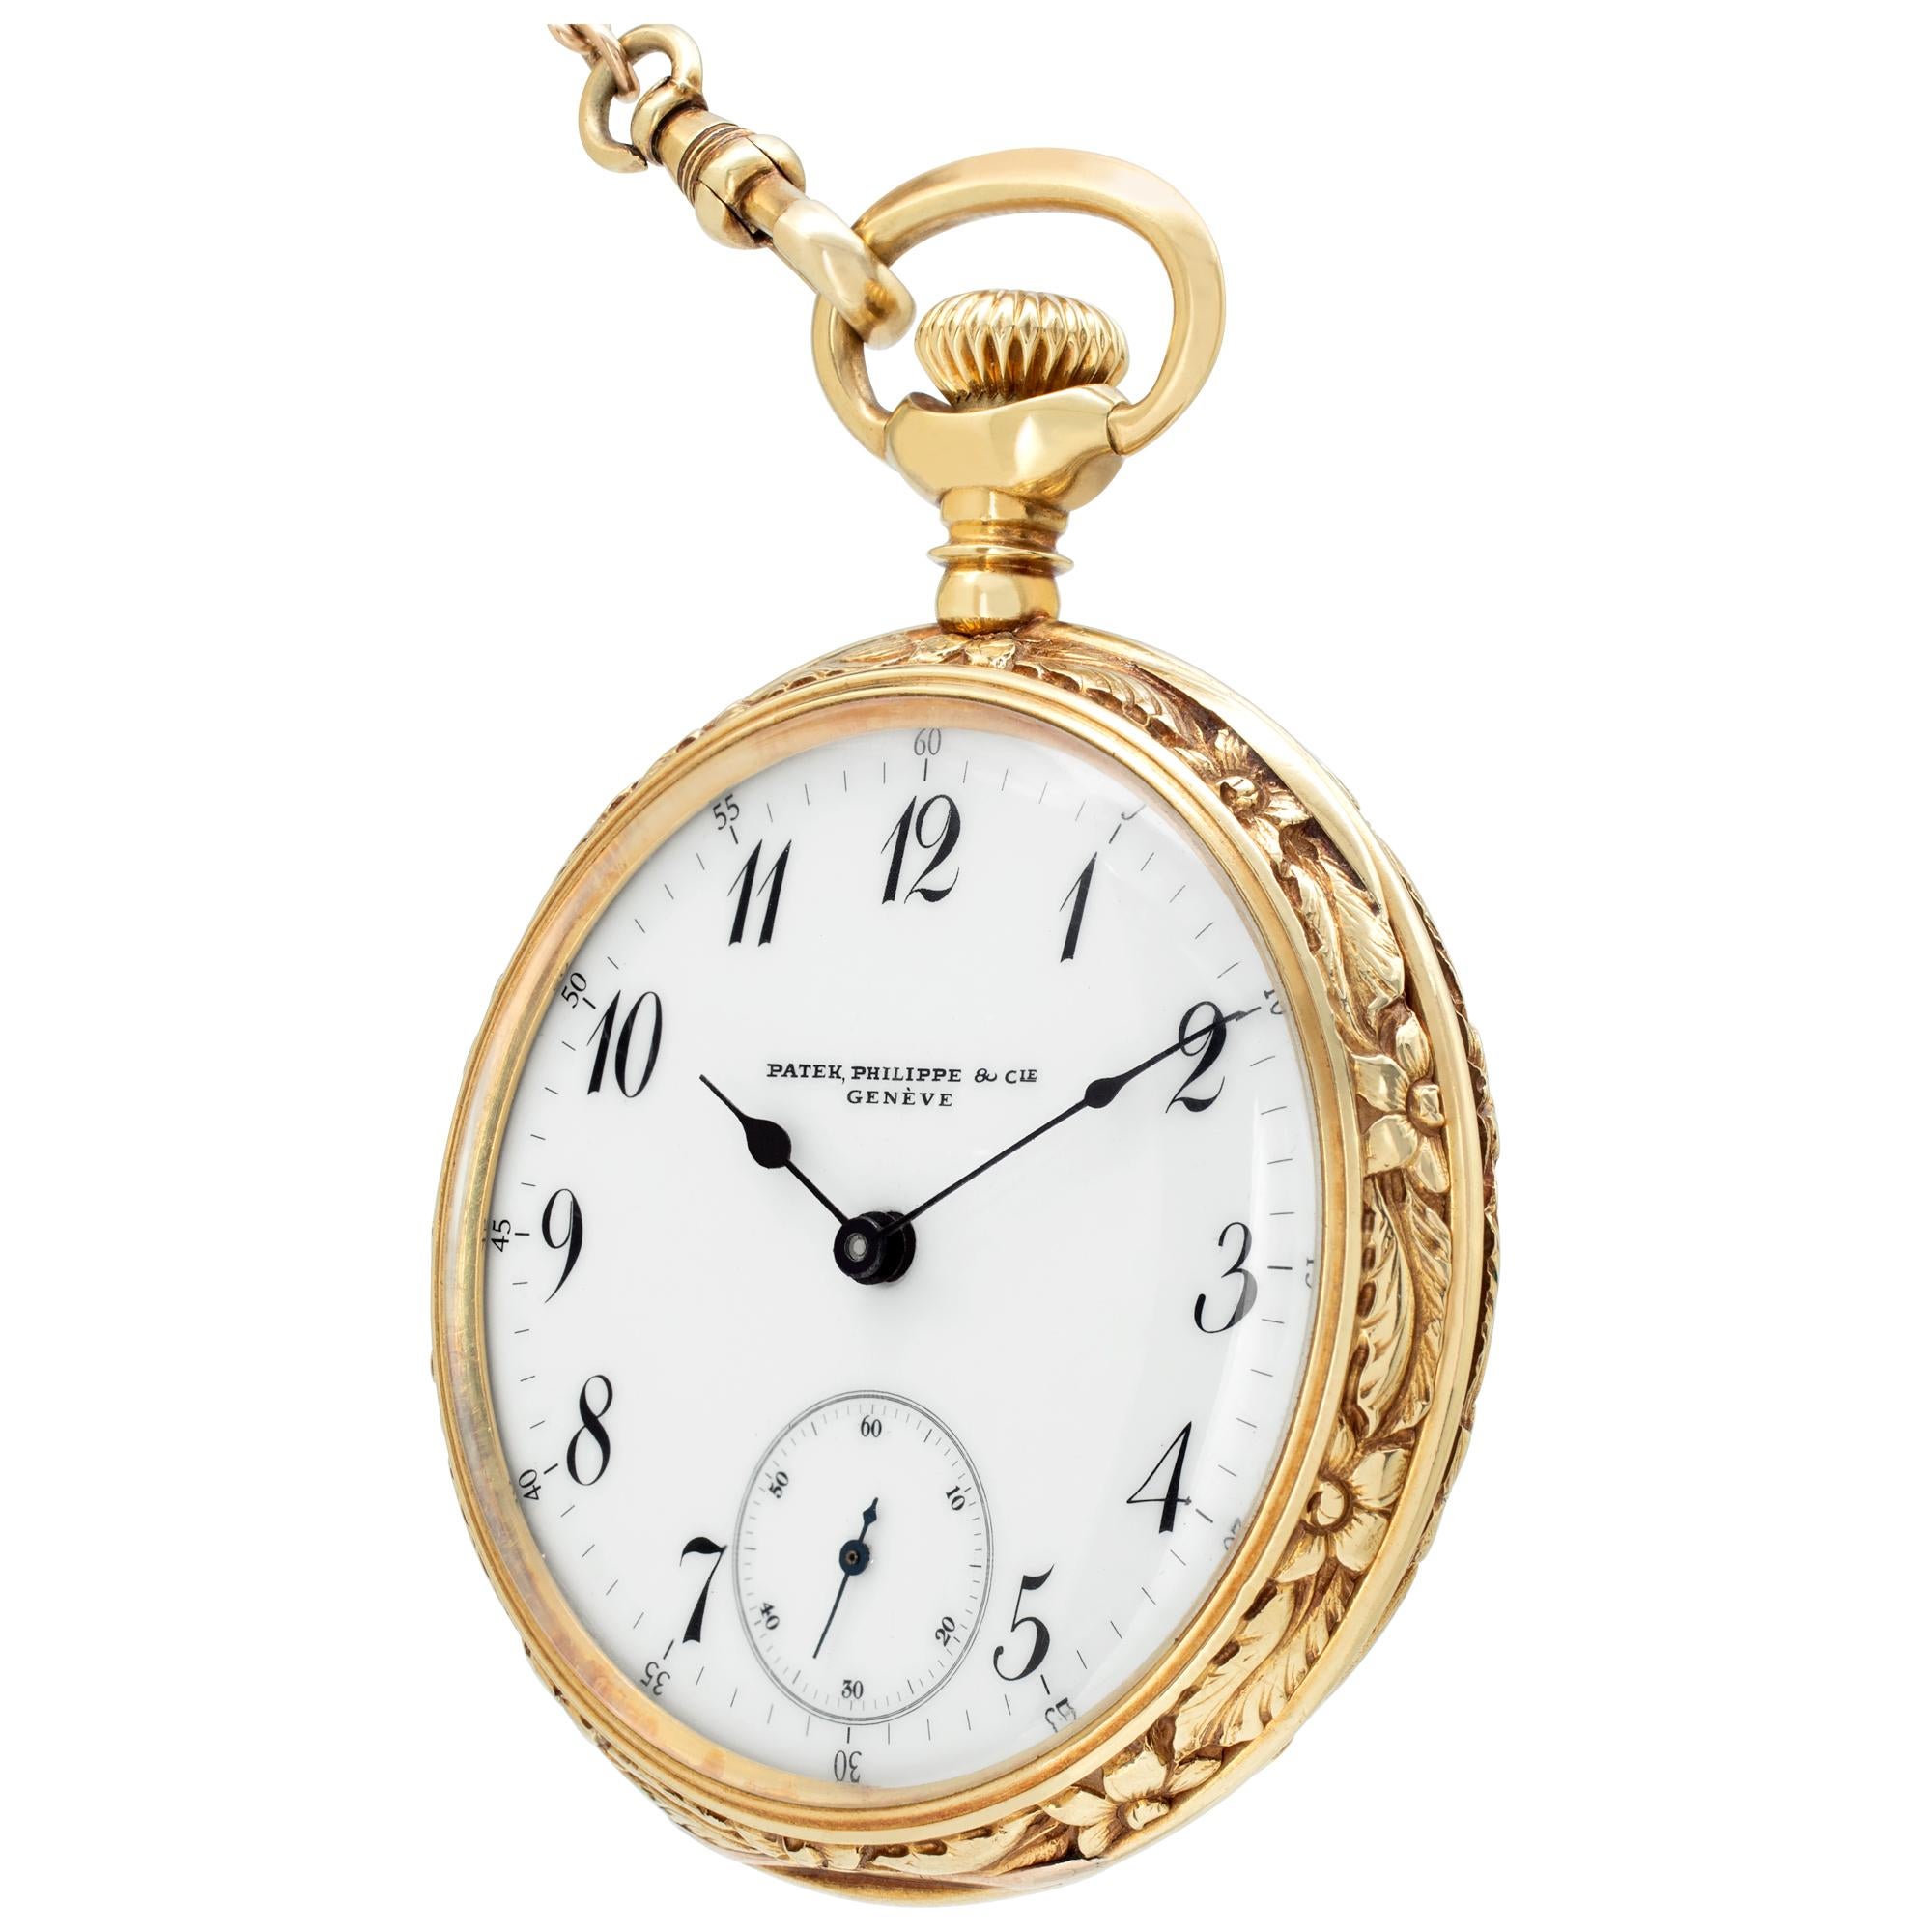 Patek Philippe open face pocket watch in with contract 18k yellow gold case with double dust cover. Presentation watch dated December 25, 1909. With subseconds. With snail regulator & high-grade wolfs teeth gears. 47 mm case size. Fine Pre-owned